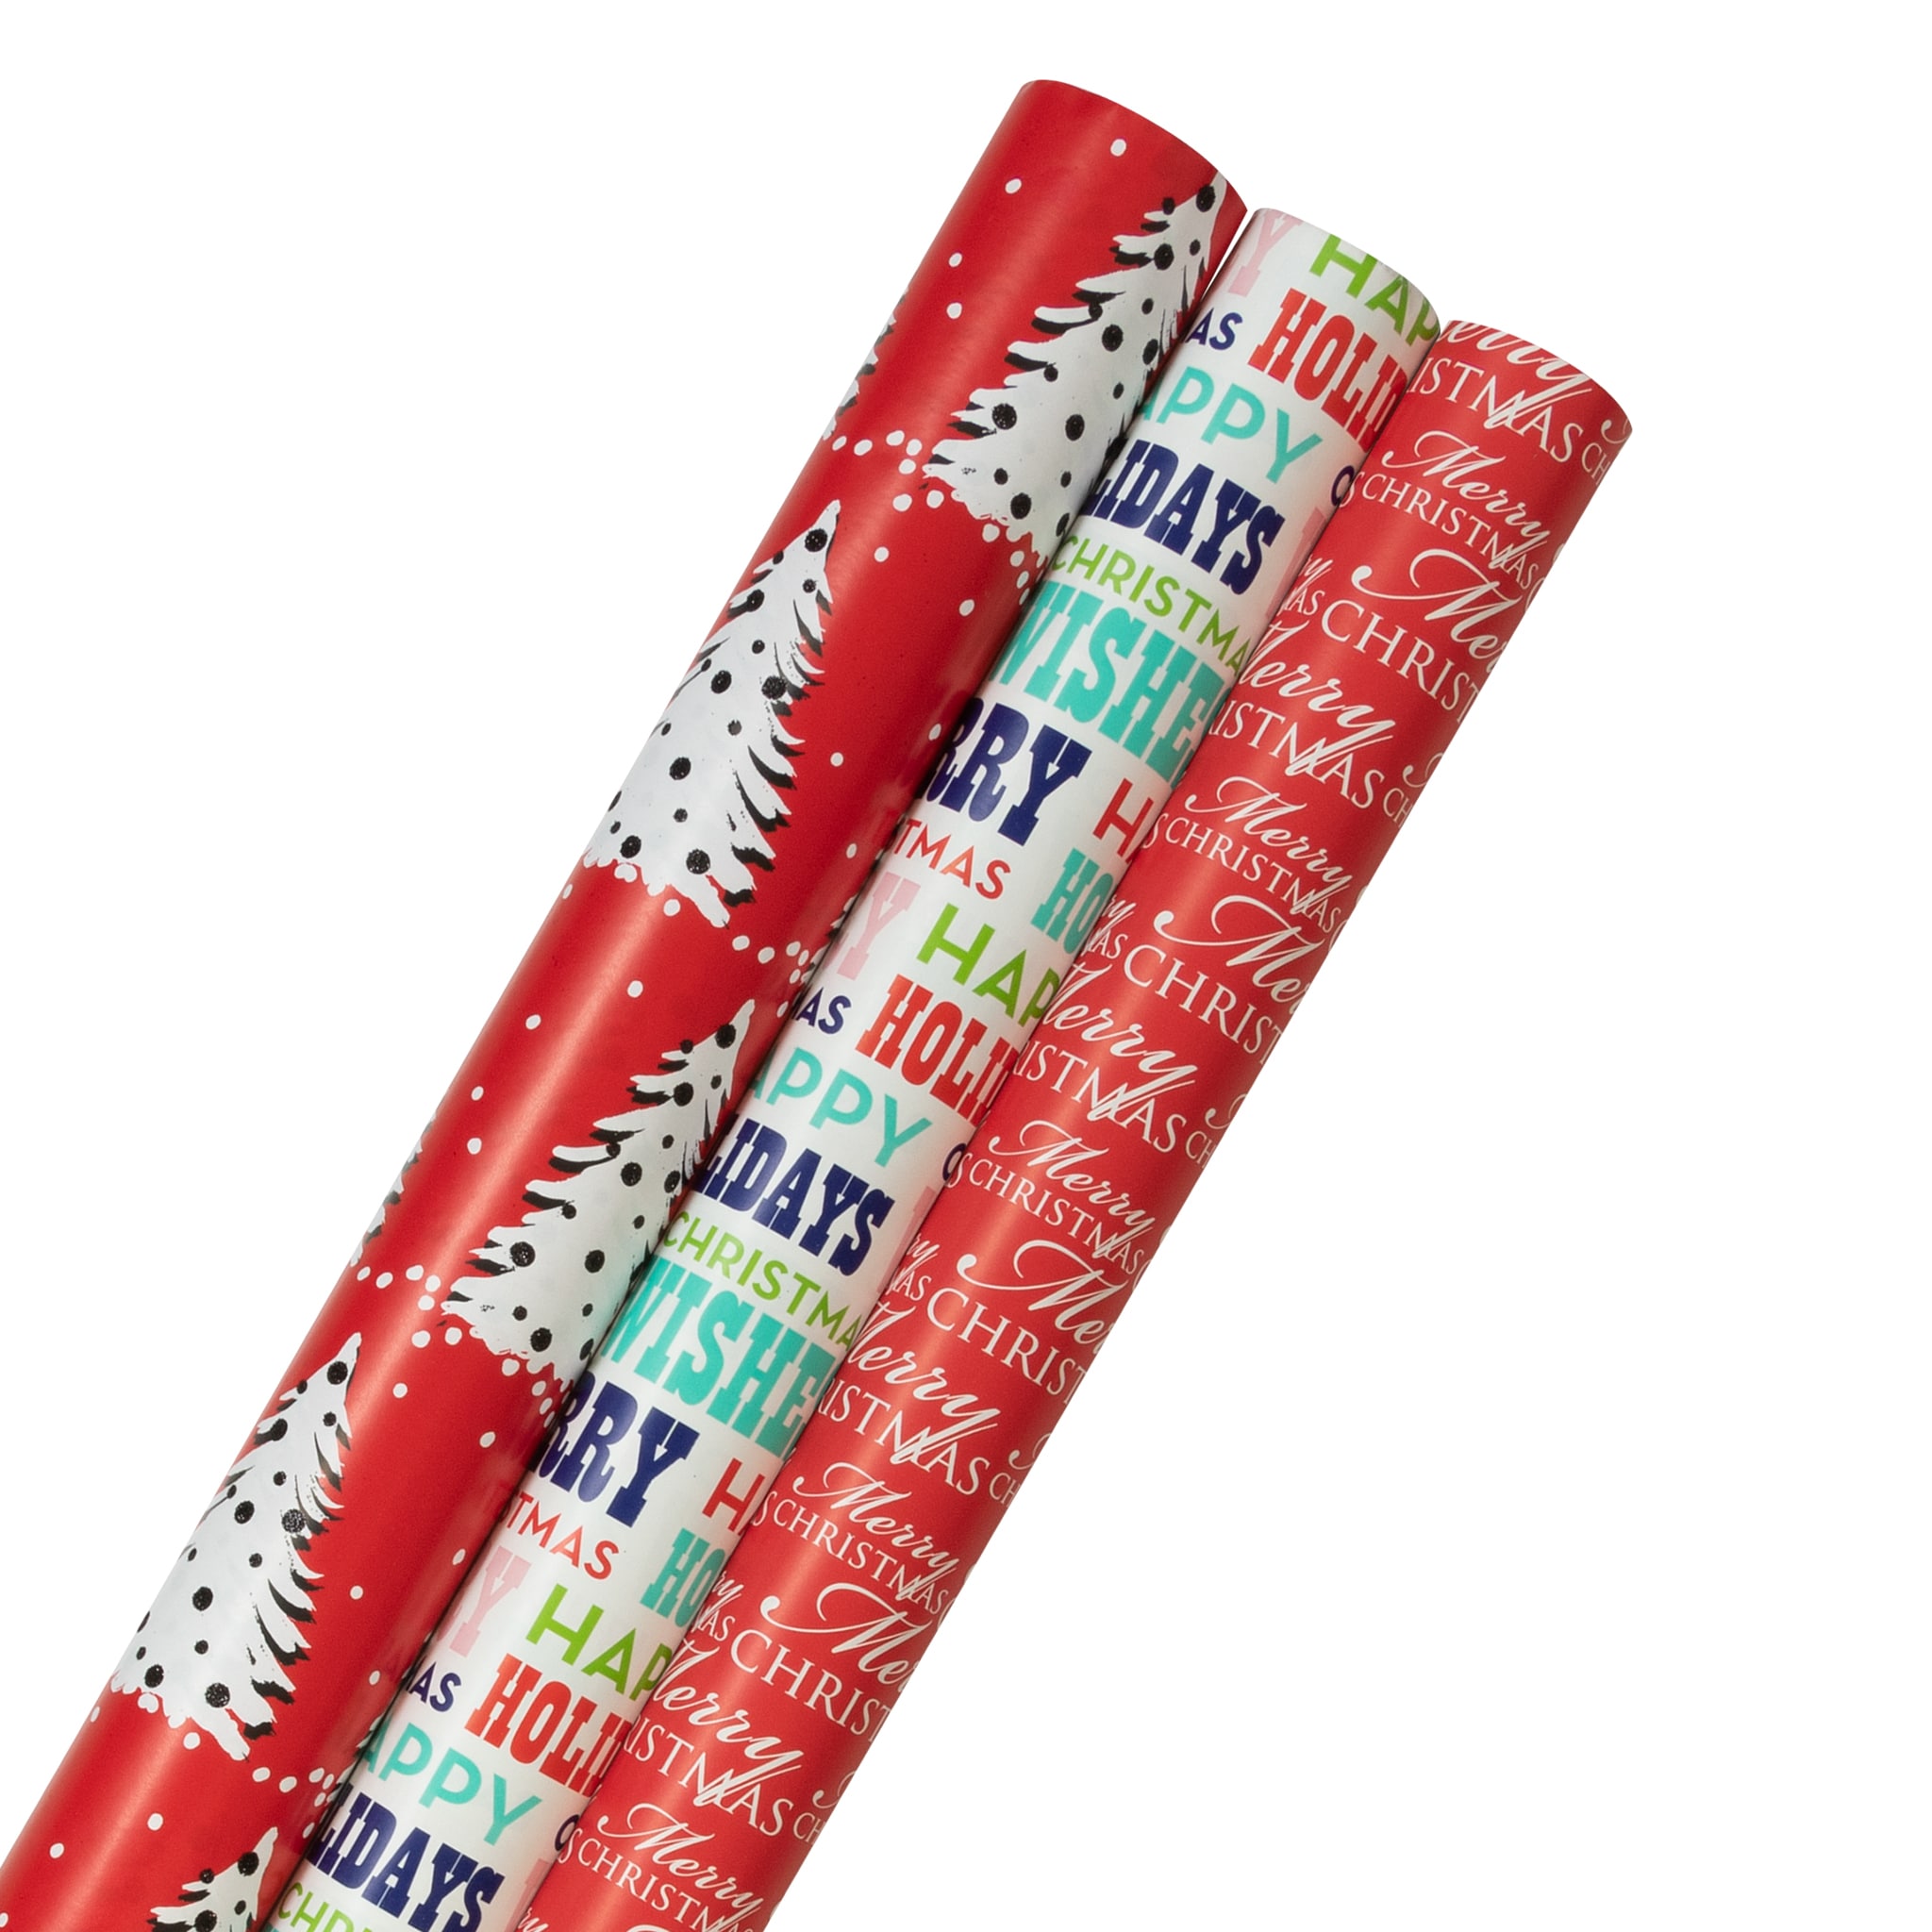 JAM PAPER Red Glossy Gift Wrapping Paper Roll - 2 packs of 25 Sq. Ft.